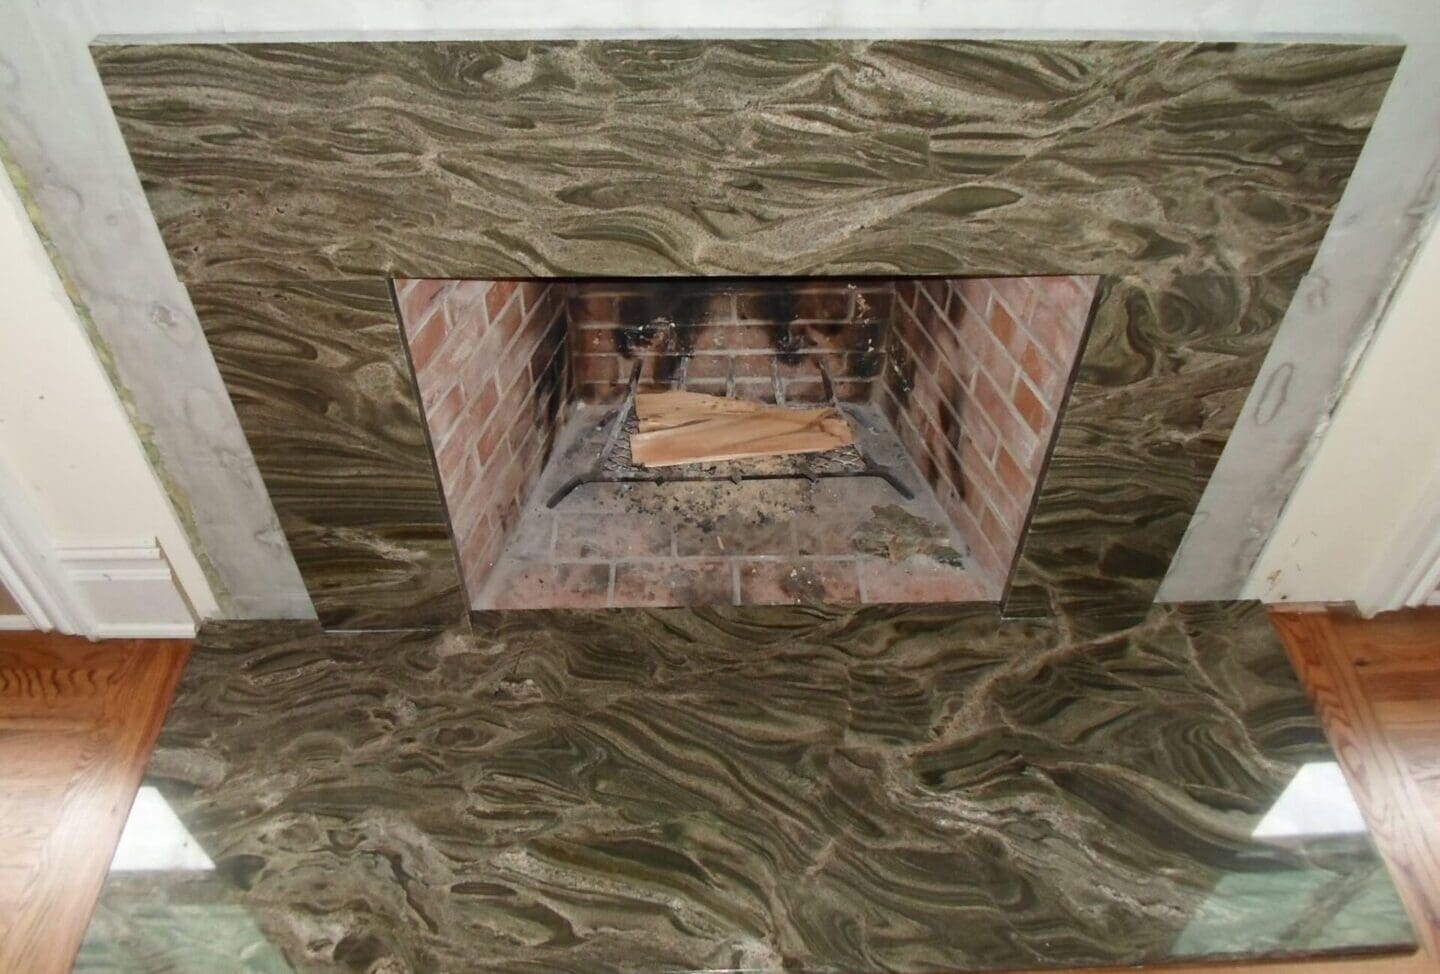 A fireplace with marble tile and wood in the center.